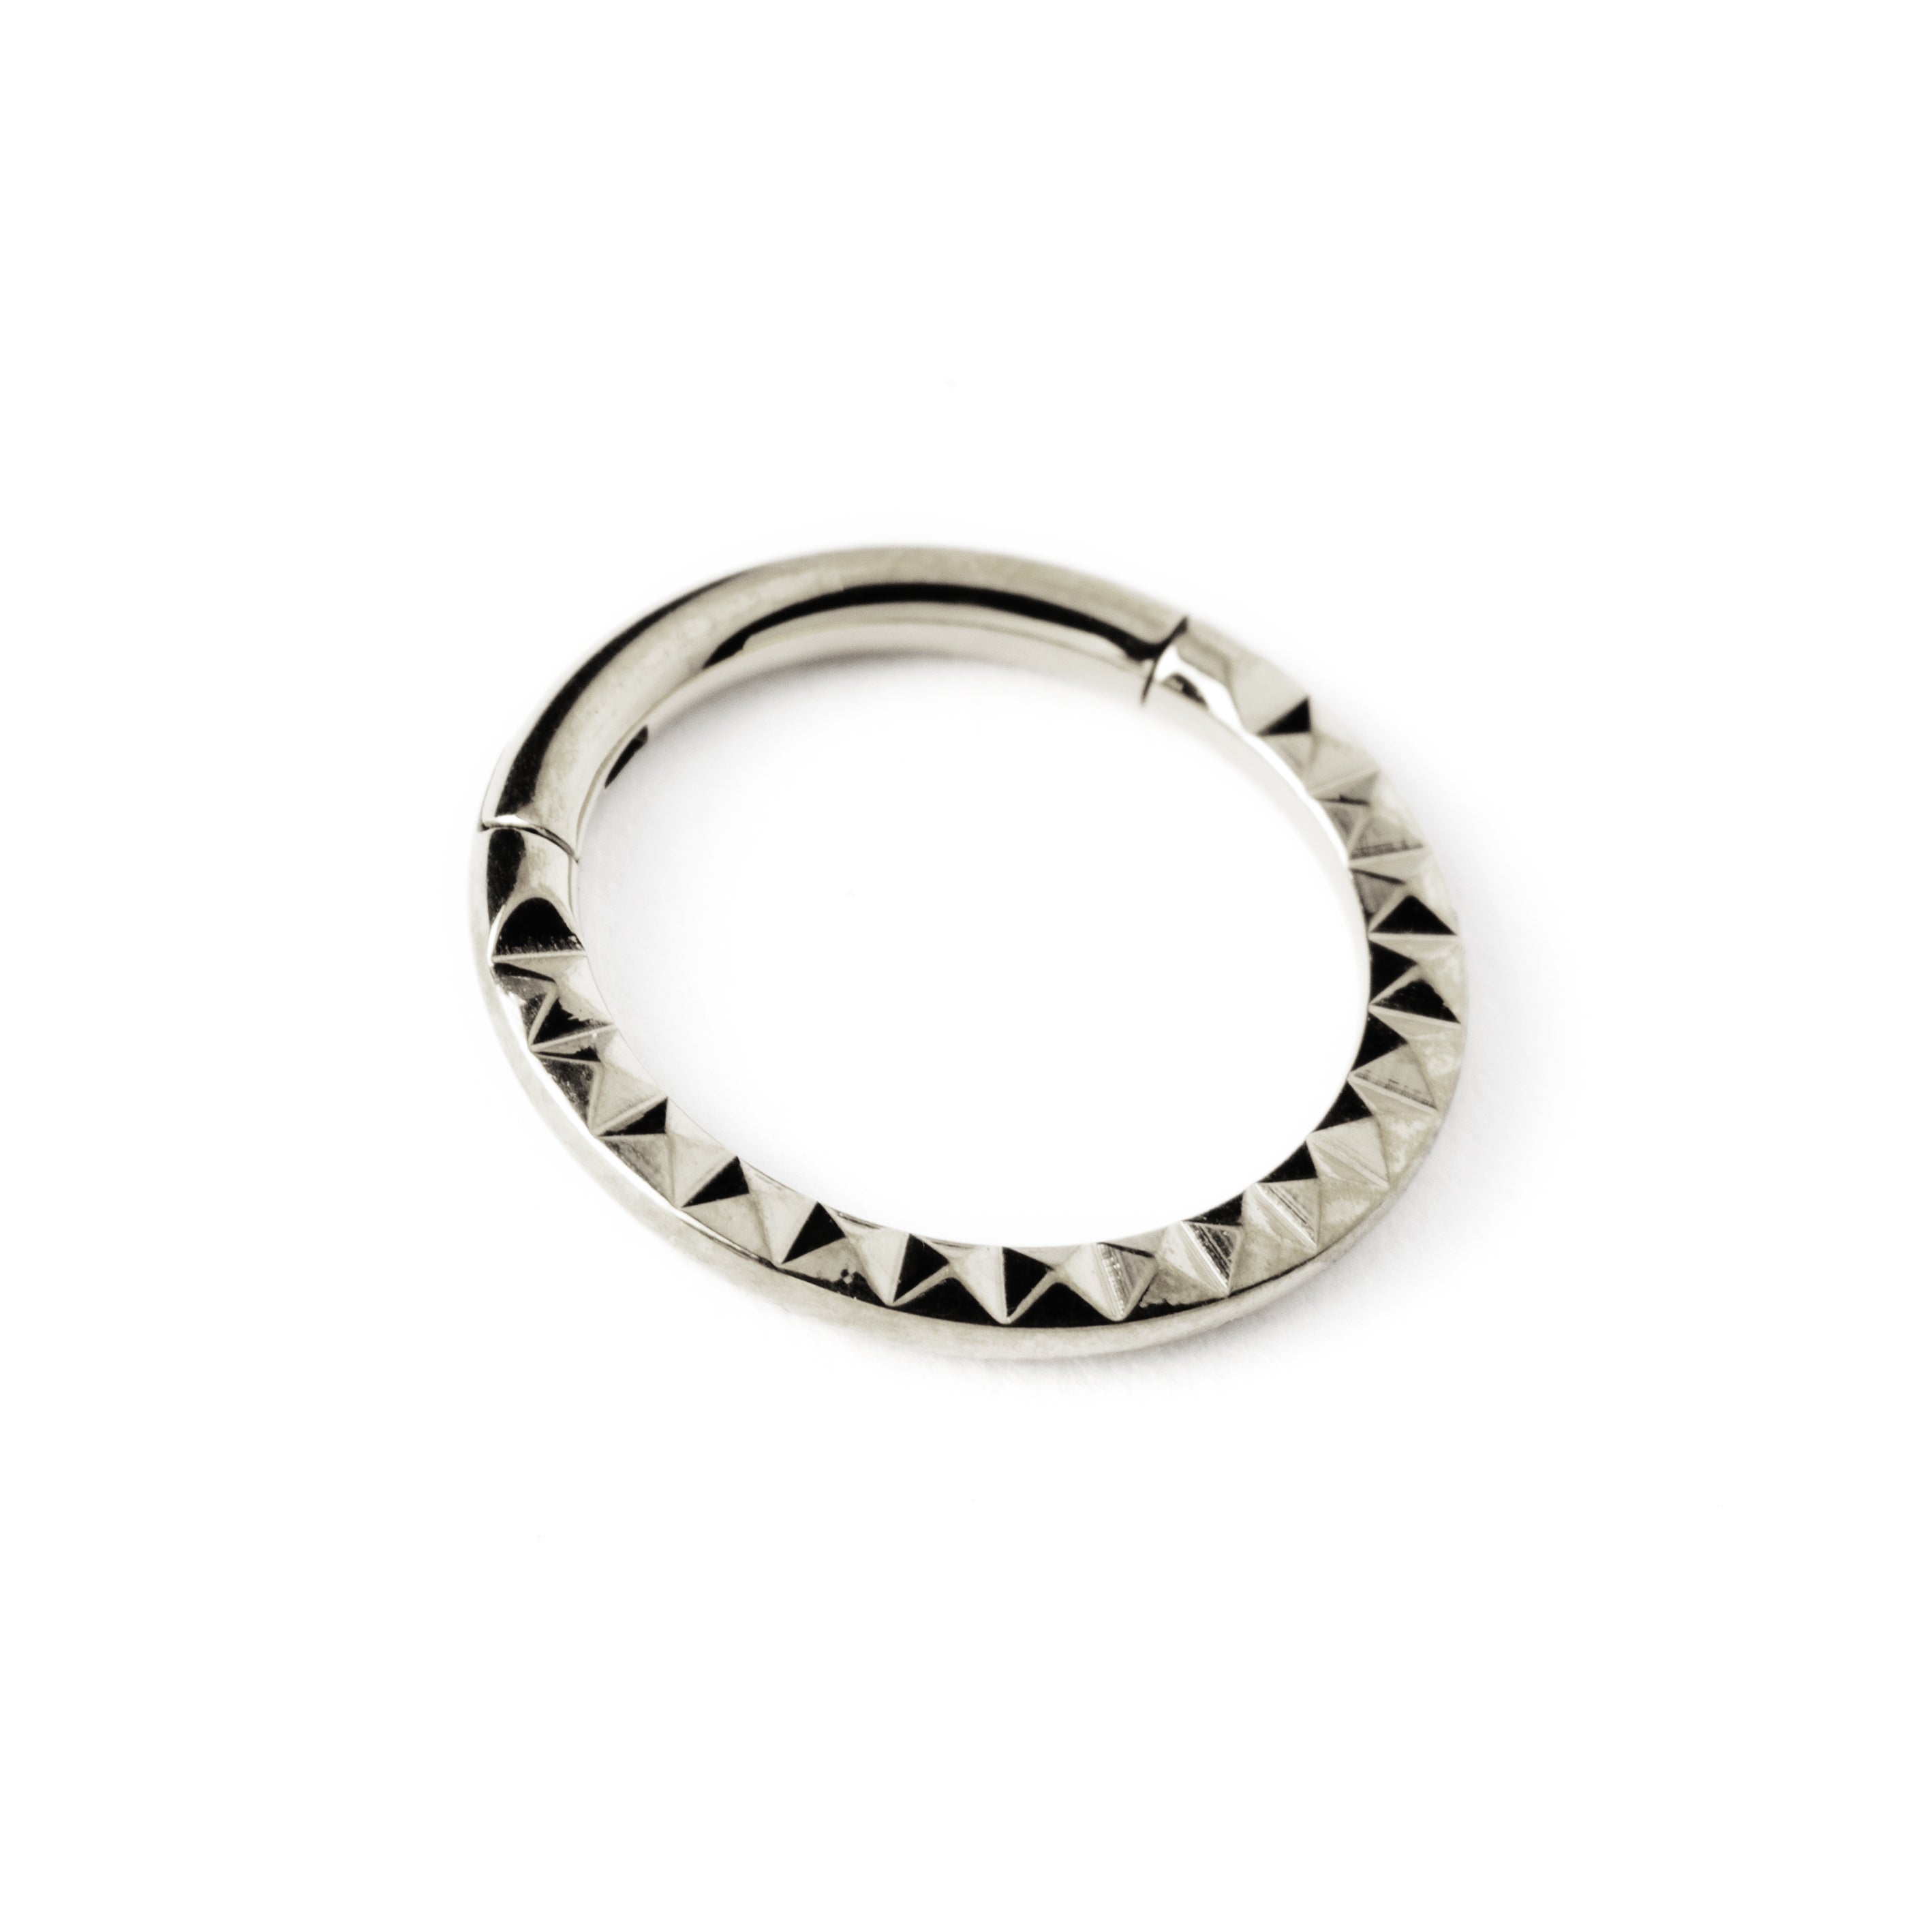 Giza surgical steel clicker ring with 3d pyramid patter right side view 